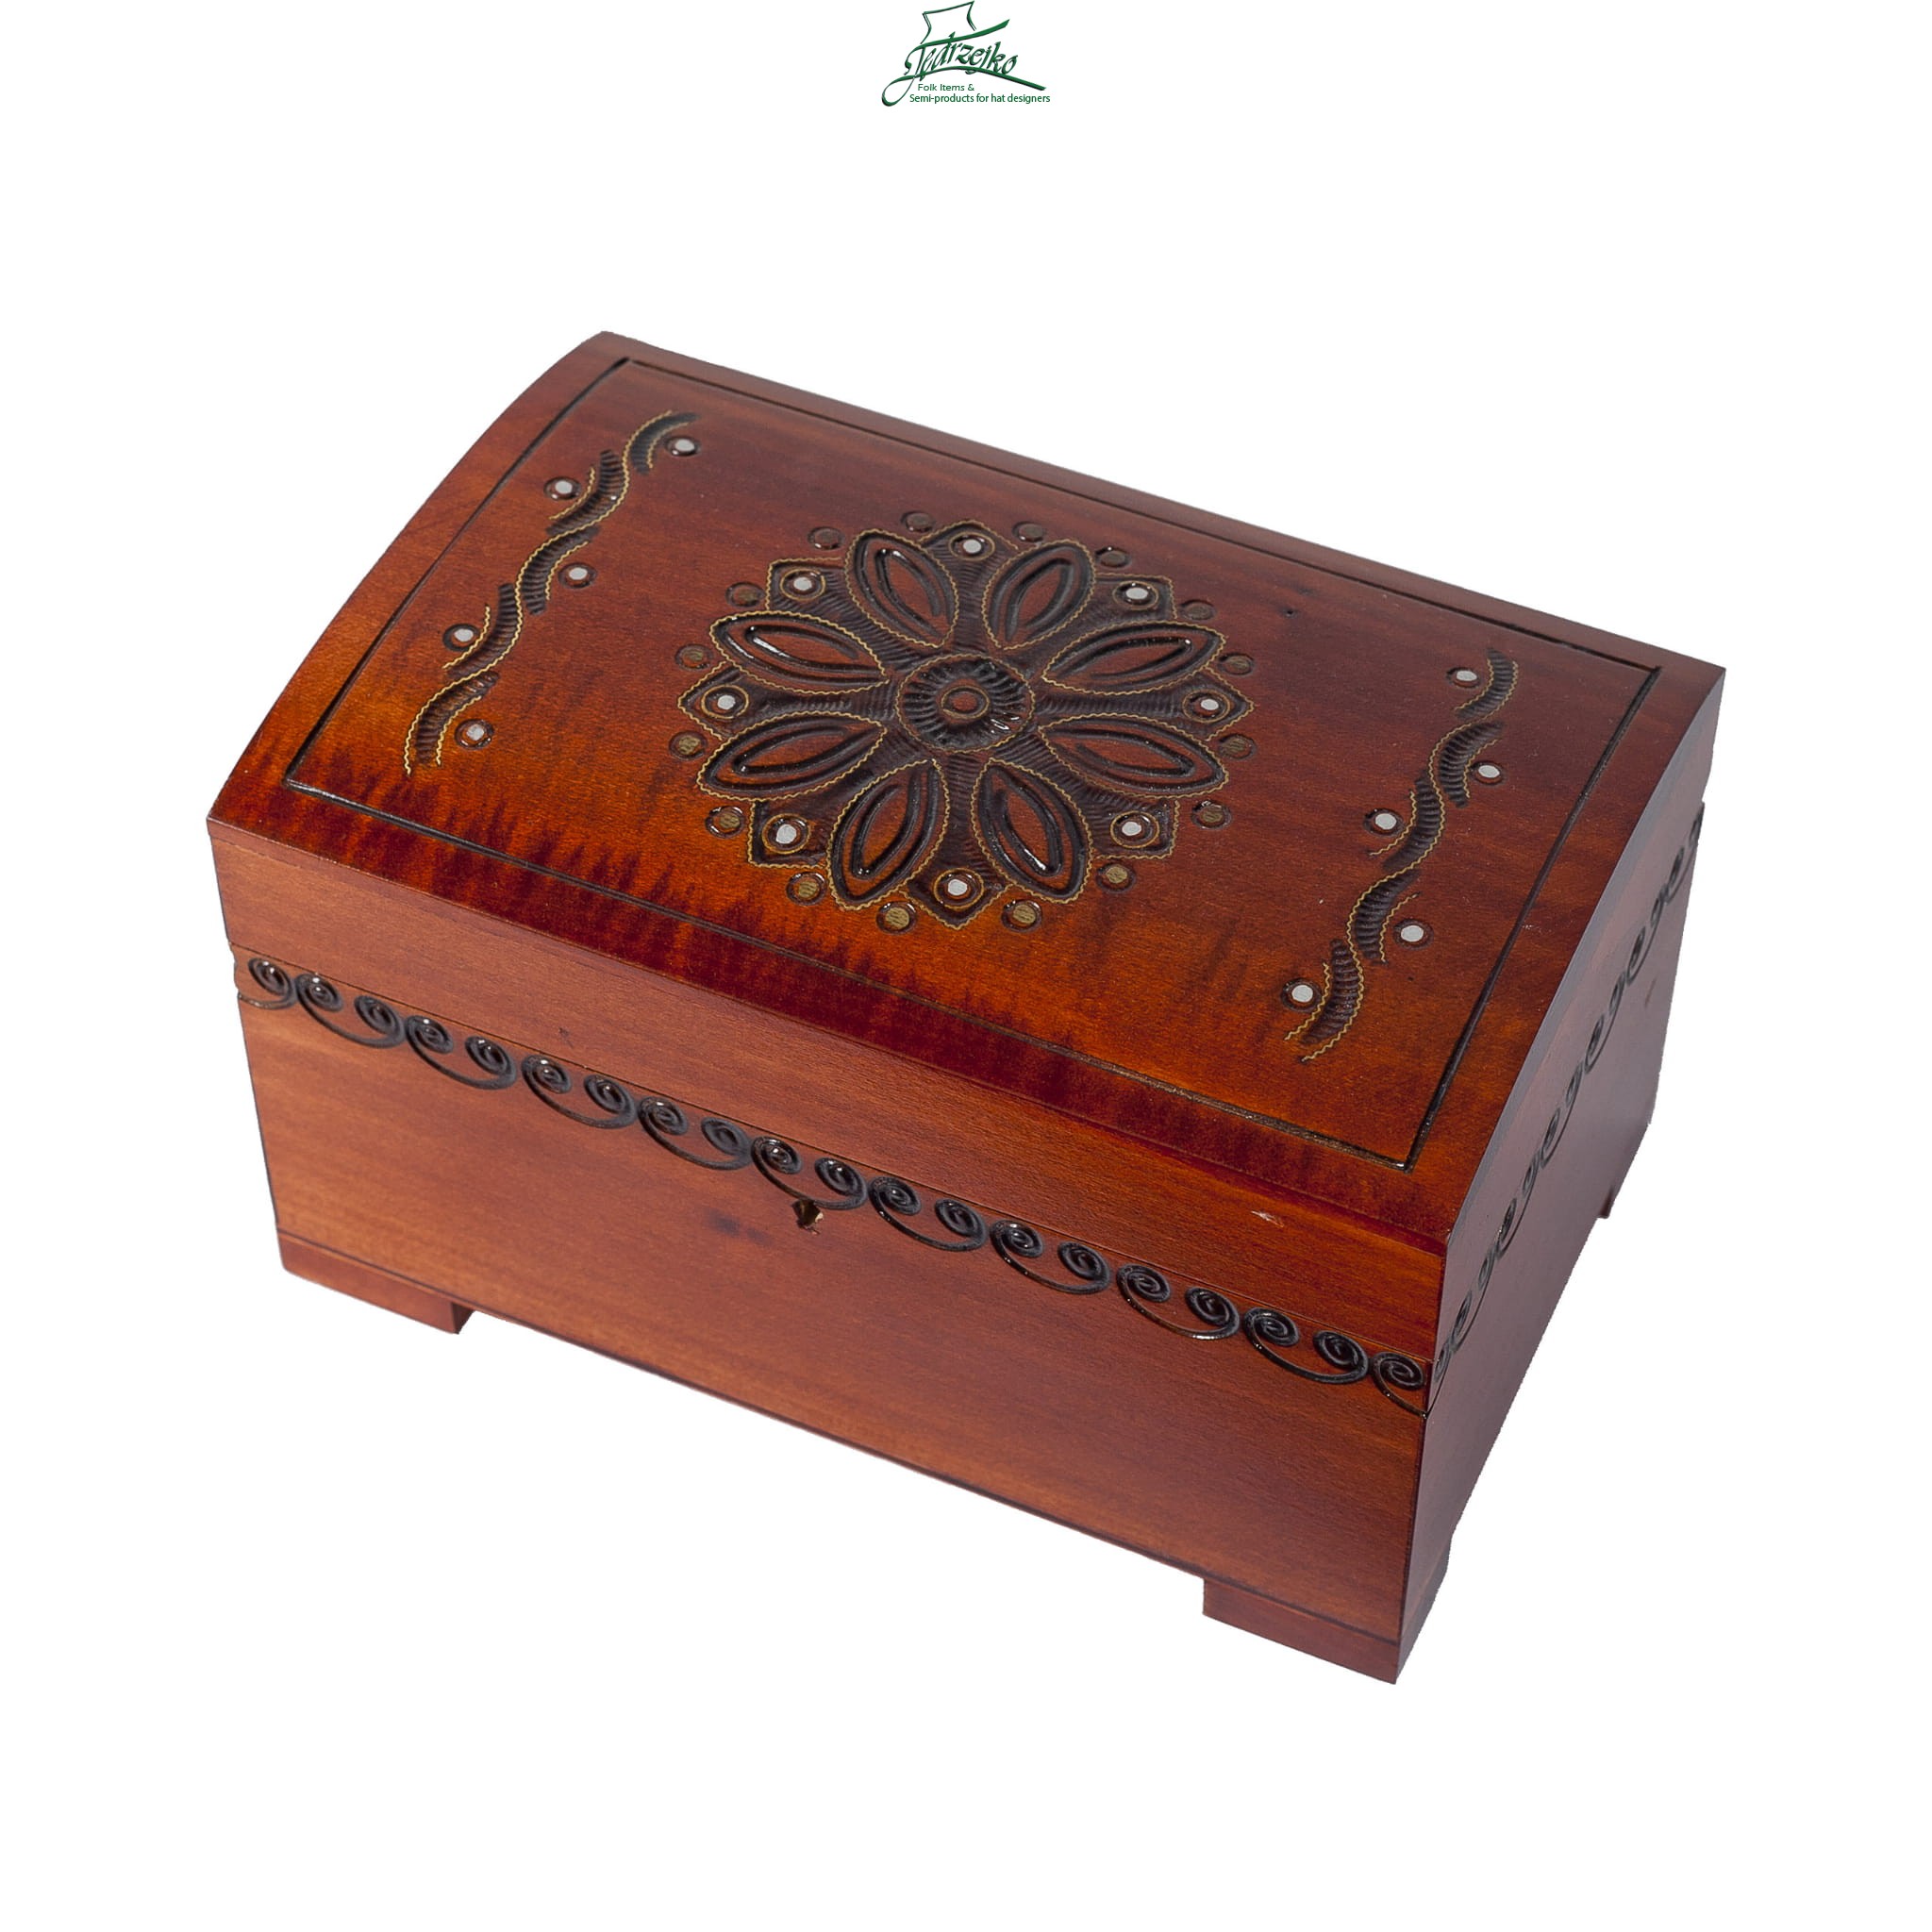 Handcrafted Treasures: Creating a Personalized Jewelry Box插图2